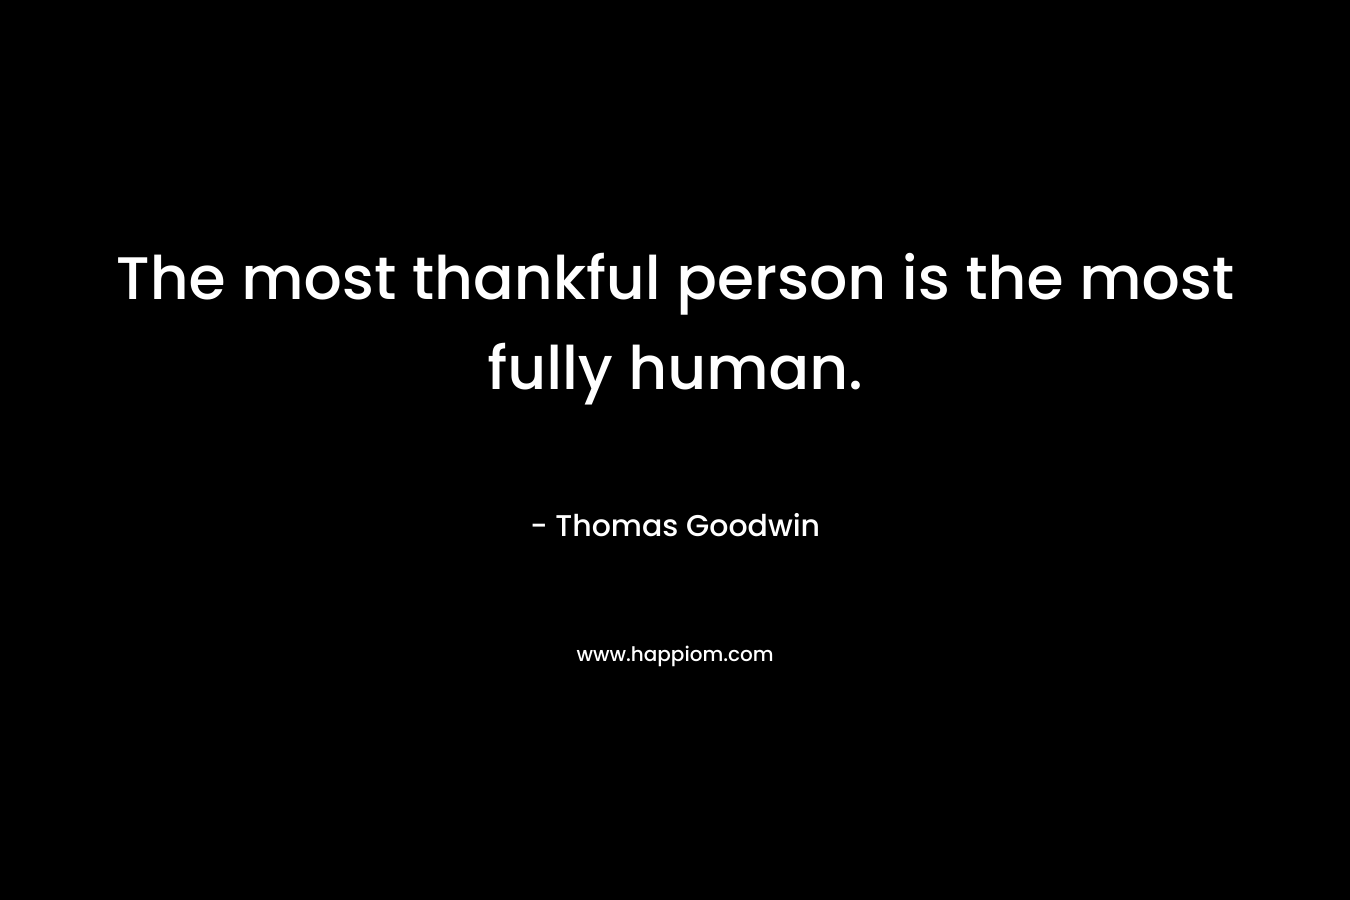 The most thankful person is the most fully human.